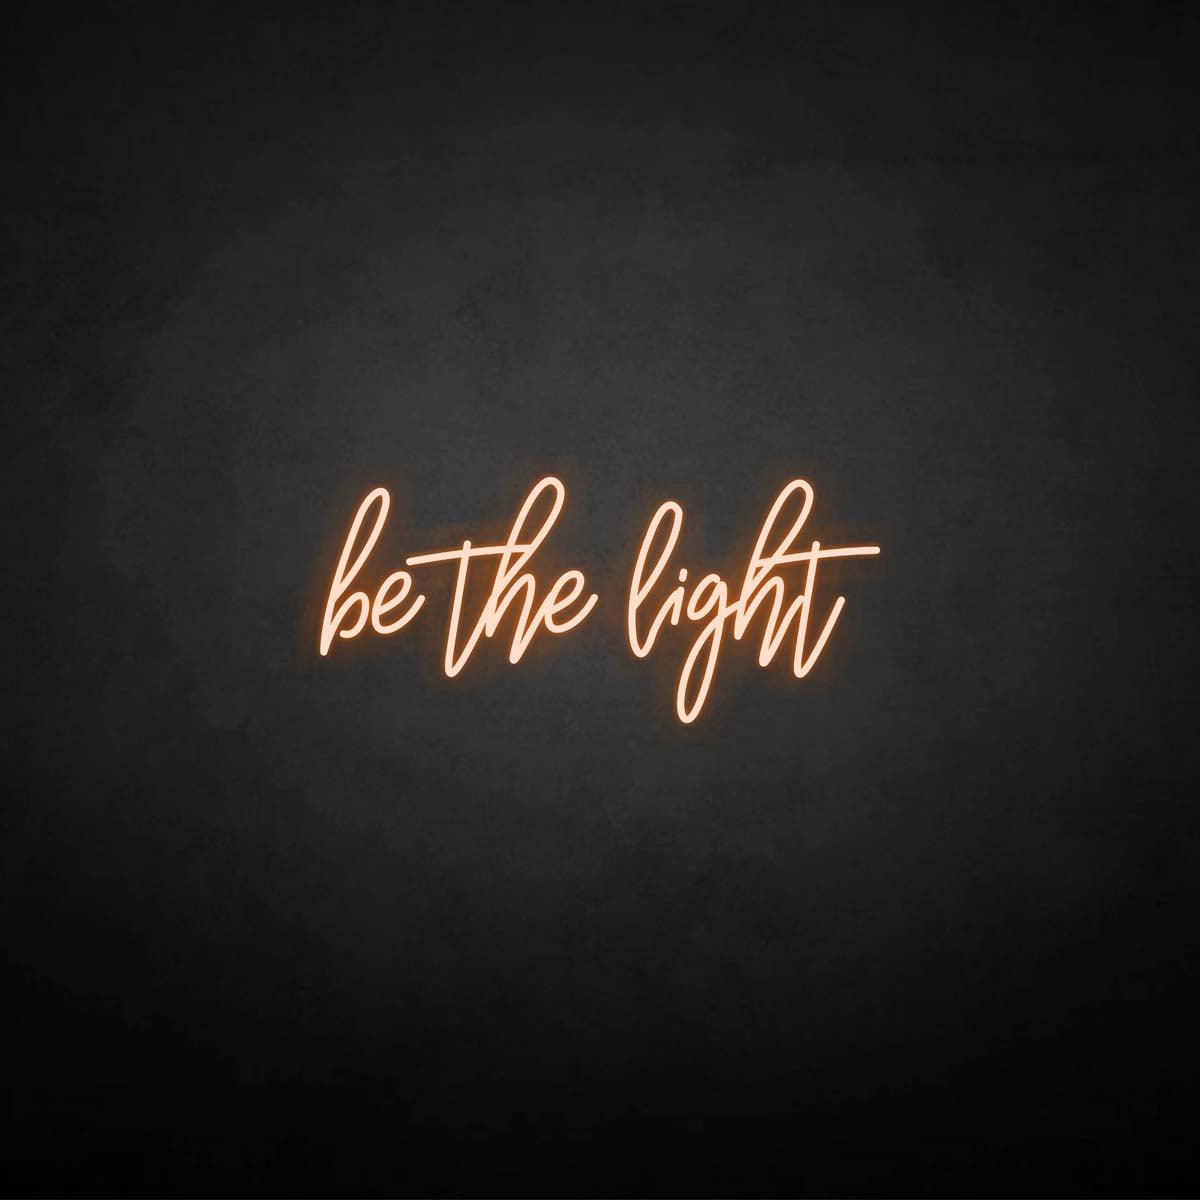 'Be the light' neon sign